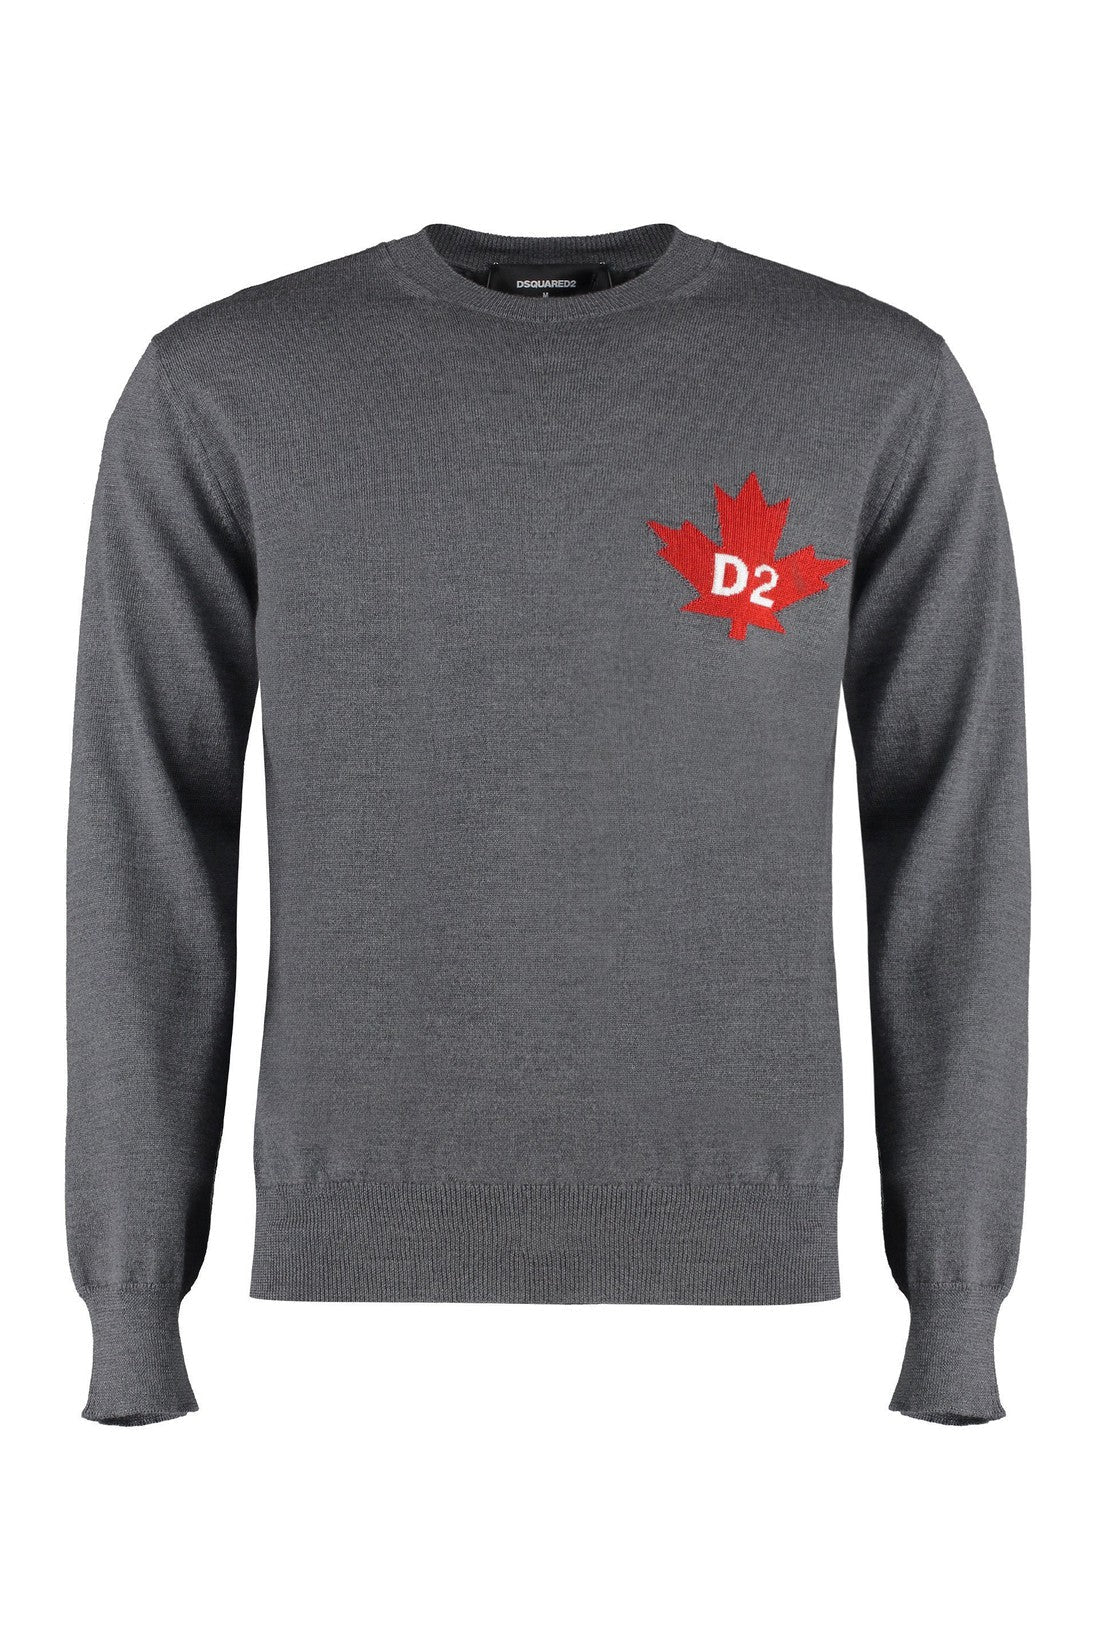 Dsquared2-OUTLET-SALE-Crew-neck wool sweater-ARCHIVIST